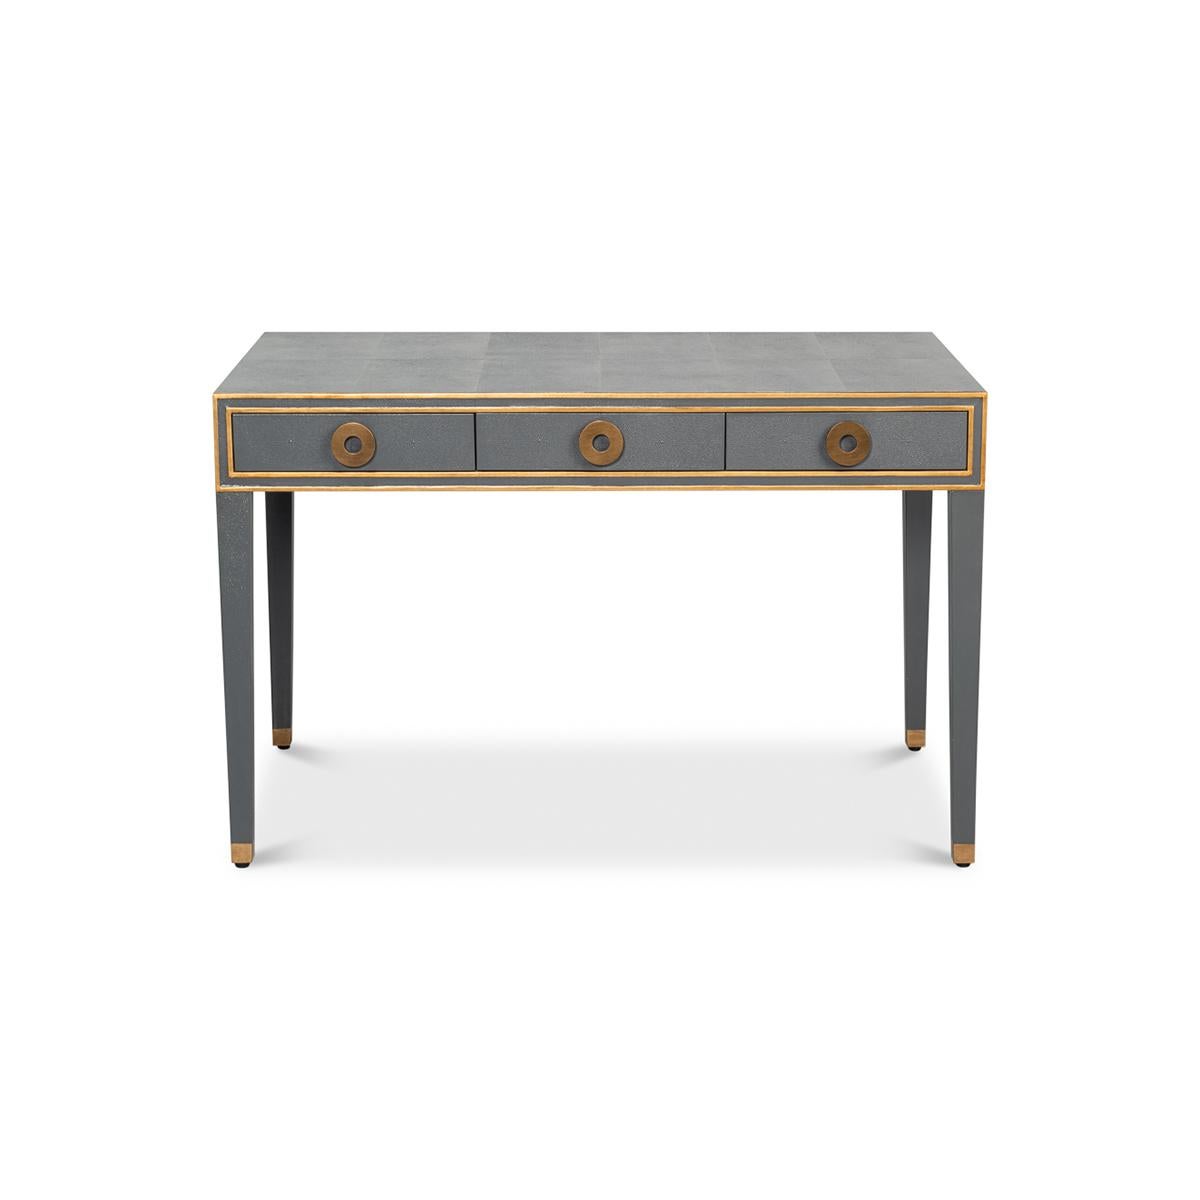 A French Art Deco style shagreen embossed leather desk in a rich pewter grey. With gilded highlight trim, three frieze drawers with modern round pulls, and raised on square tapered legs.

Dimensions: 48